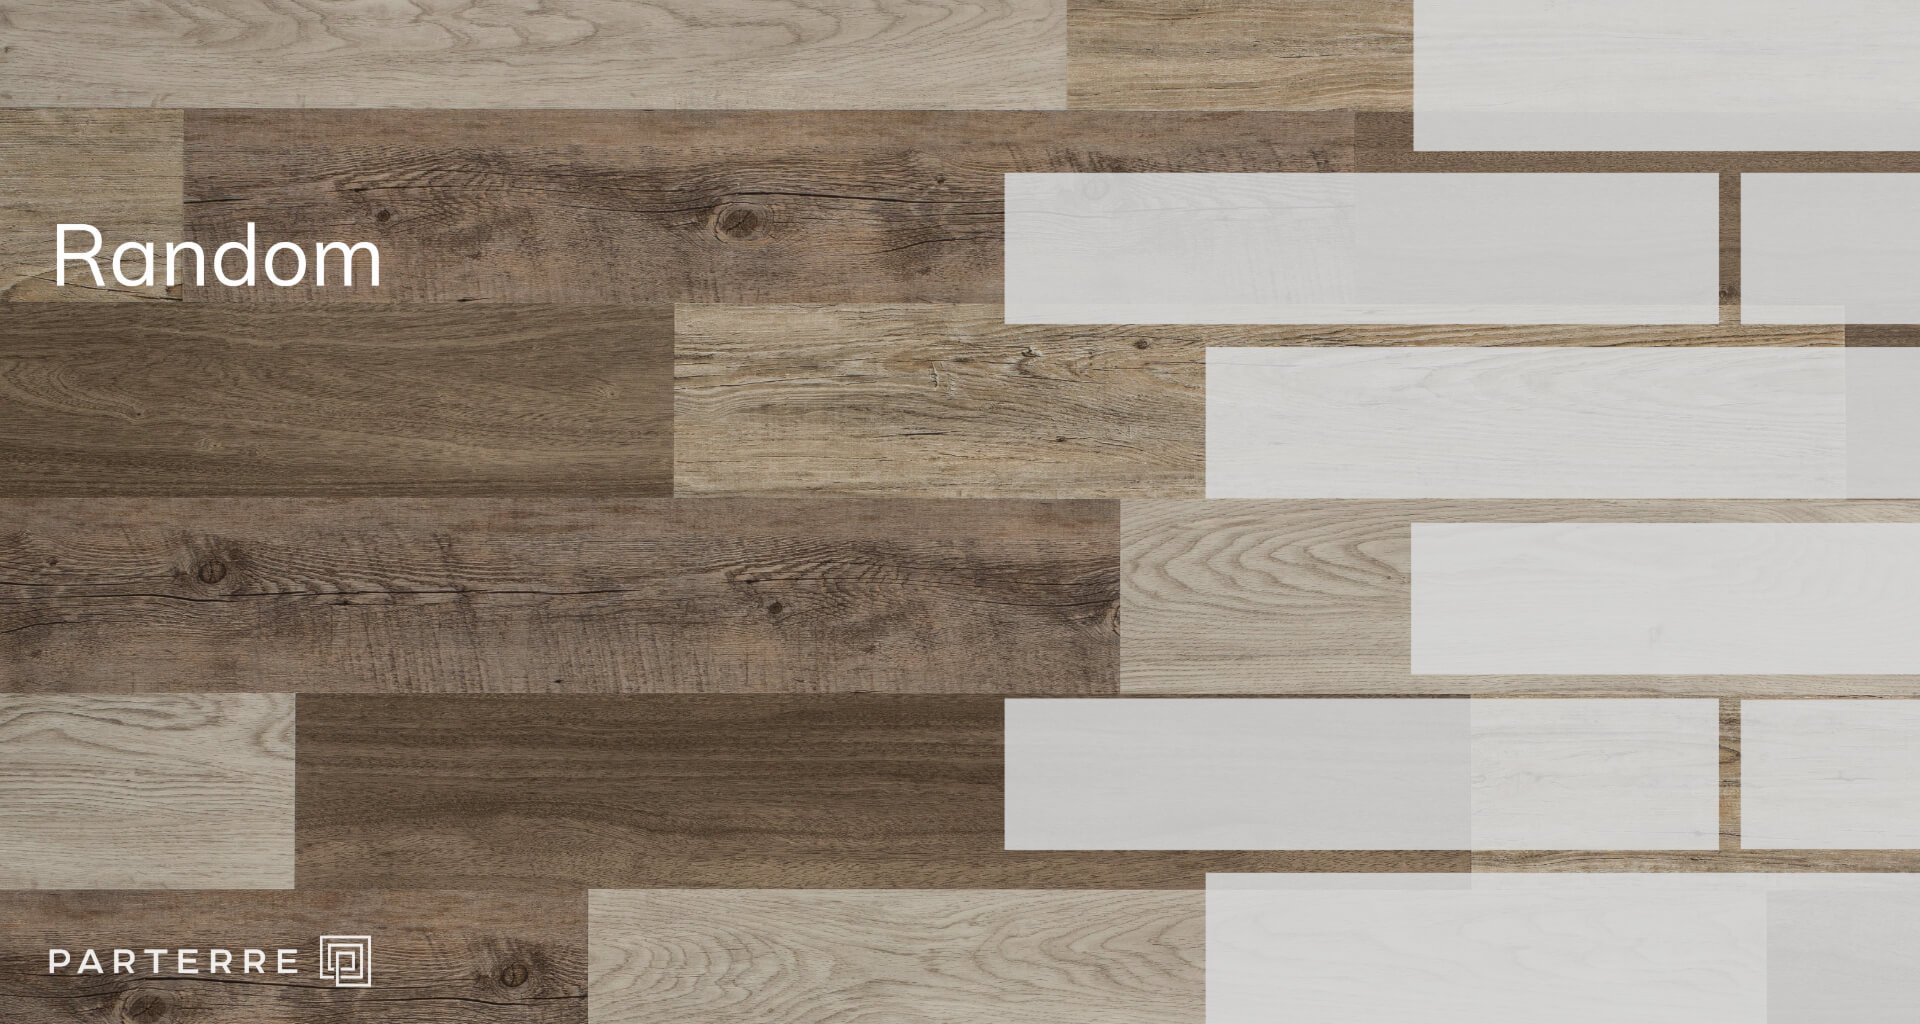 9 Vinyl Flooring Patterns For Your Next, How To Lay Out Vinyl Plank Flooring